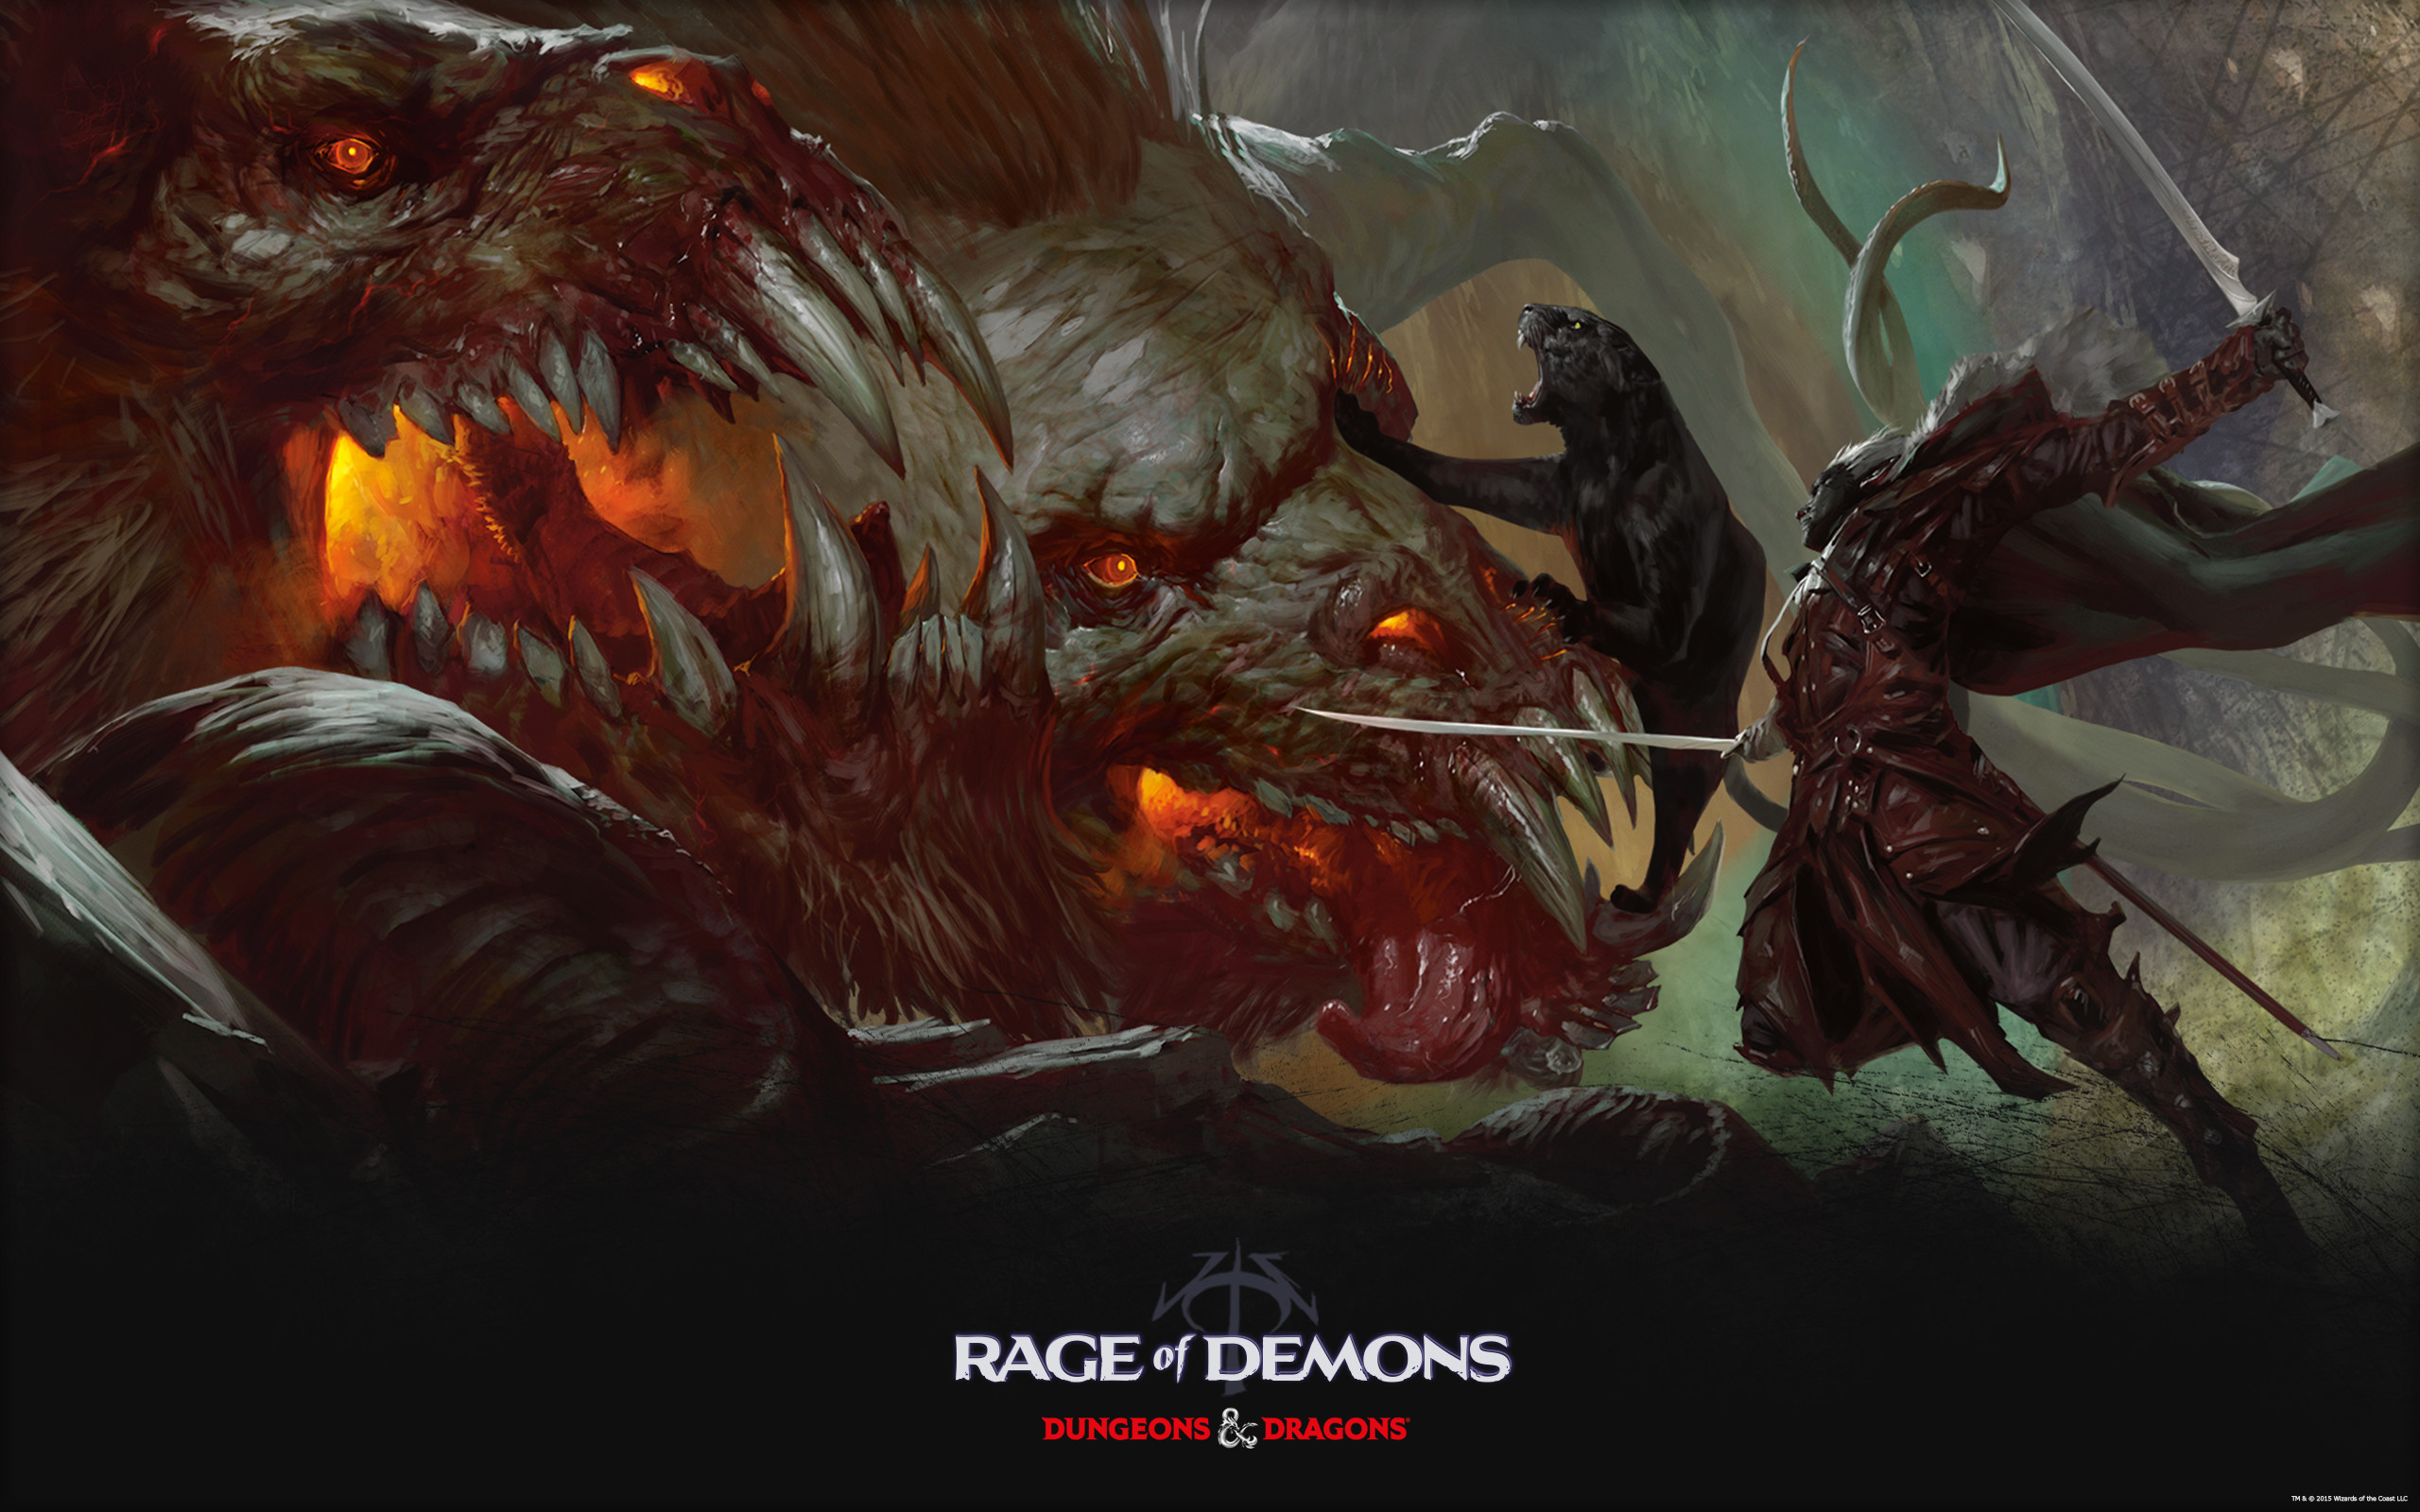 Rage of Demons, a new Dungeons & Dragons Storyline, Coming This Fall